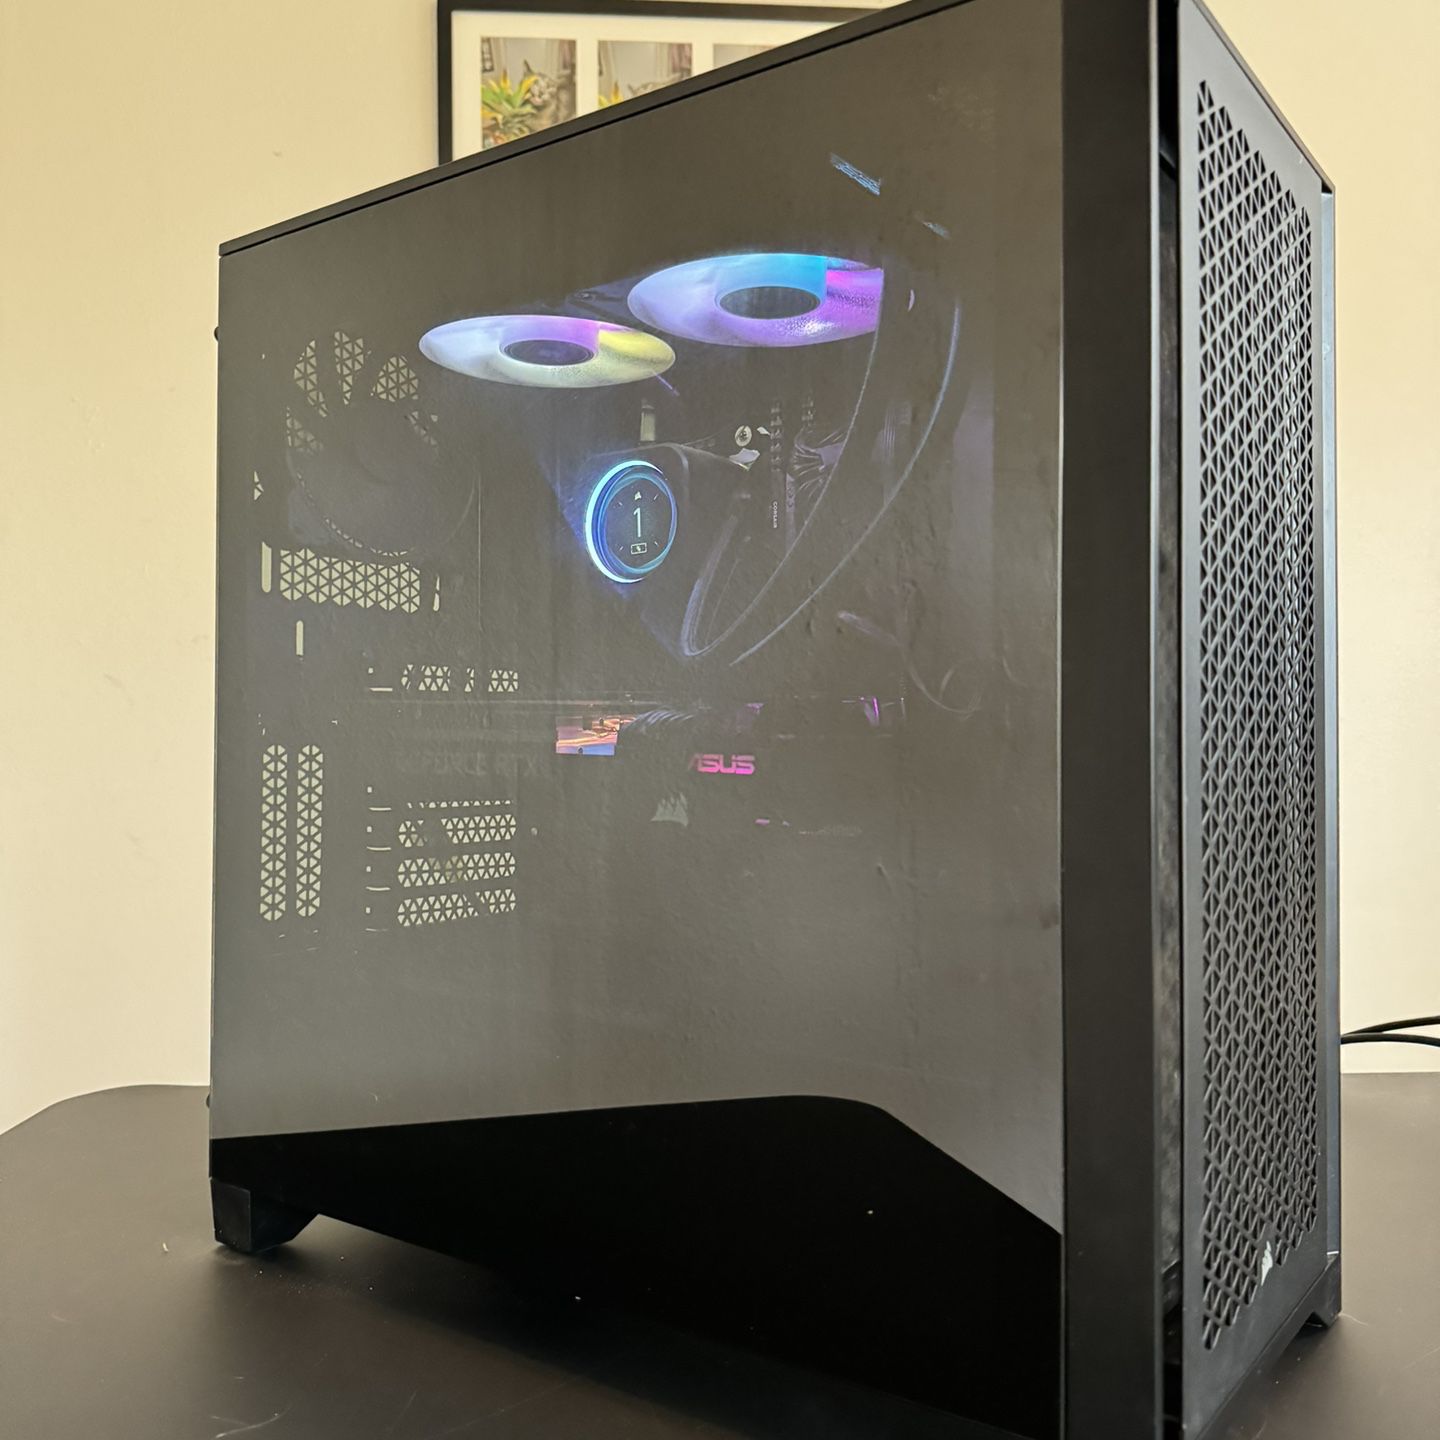 High End PC - Gaming - RTX 3070 - i7 13700K 3.4GHz 16-Core - Liquid Cooled - 32GB RAM